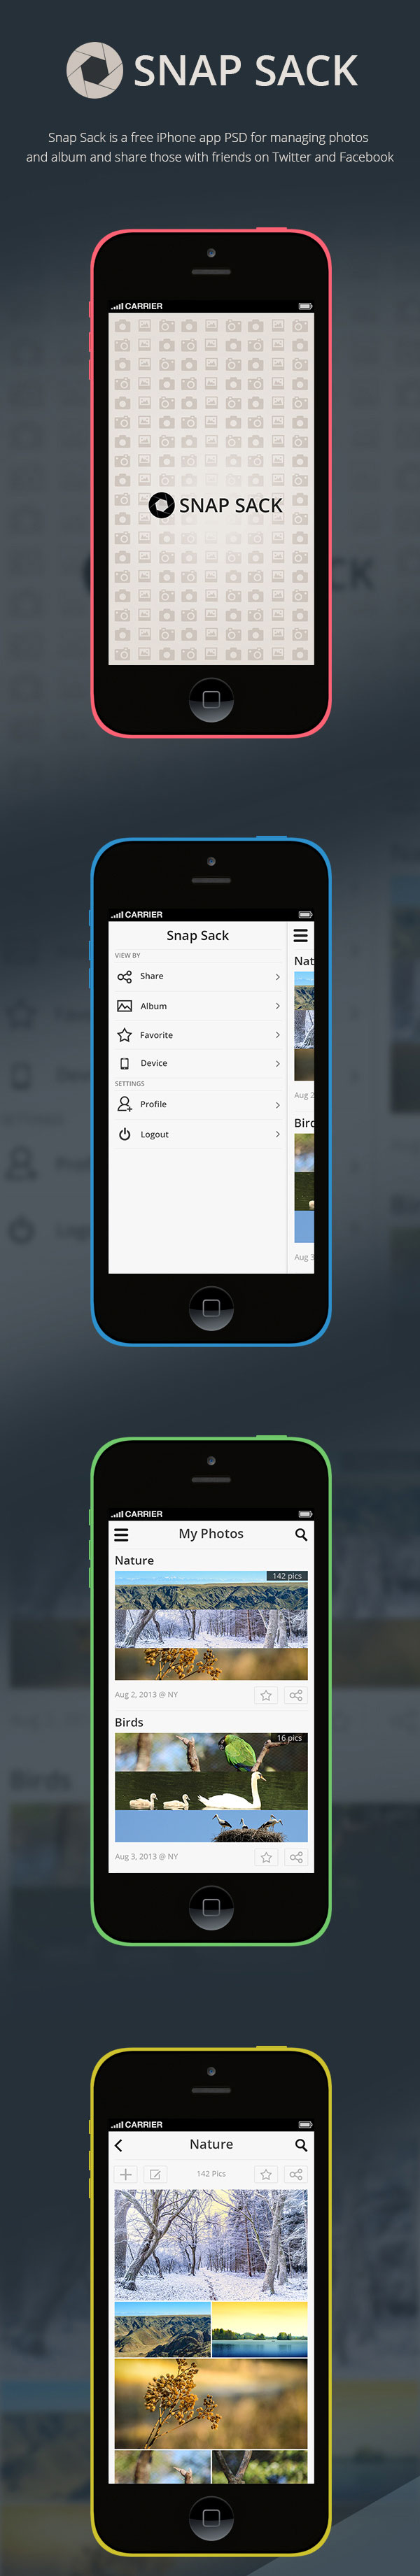 Snap-Sack-App-PSD-for-iPhone